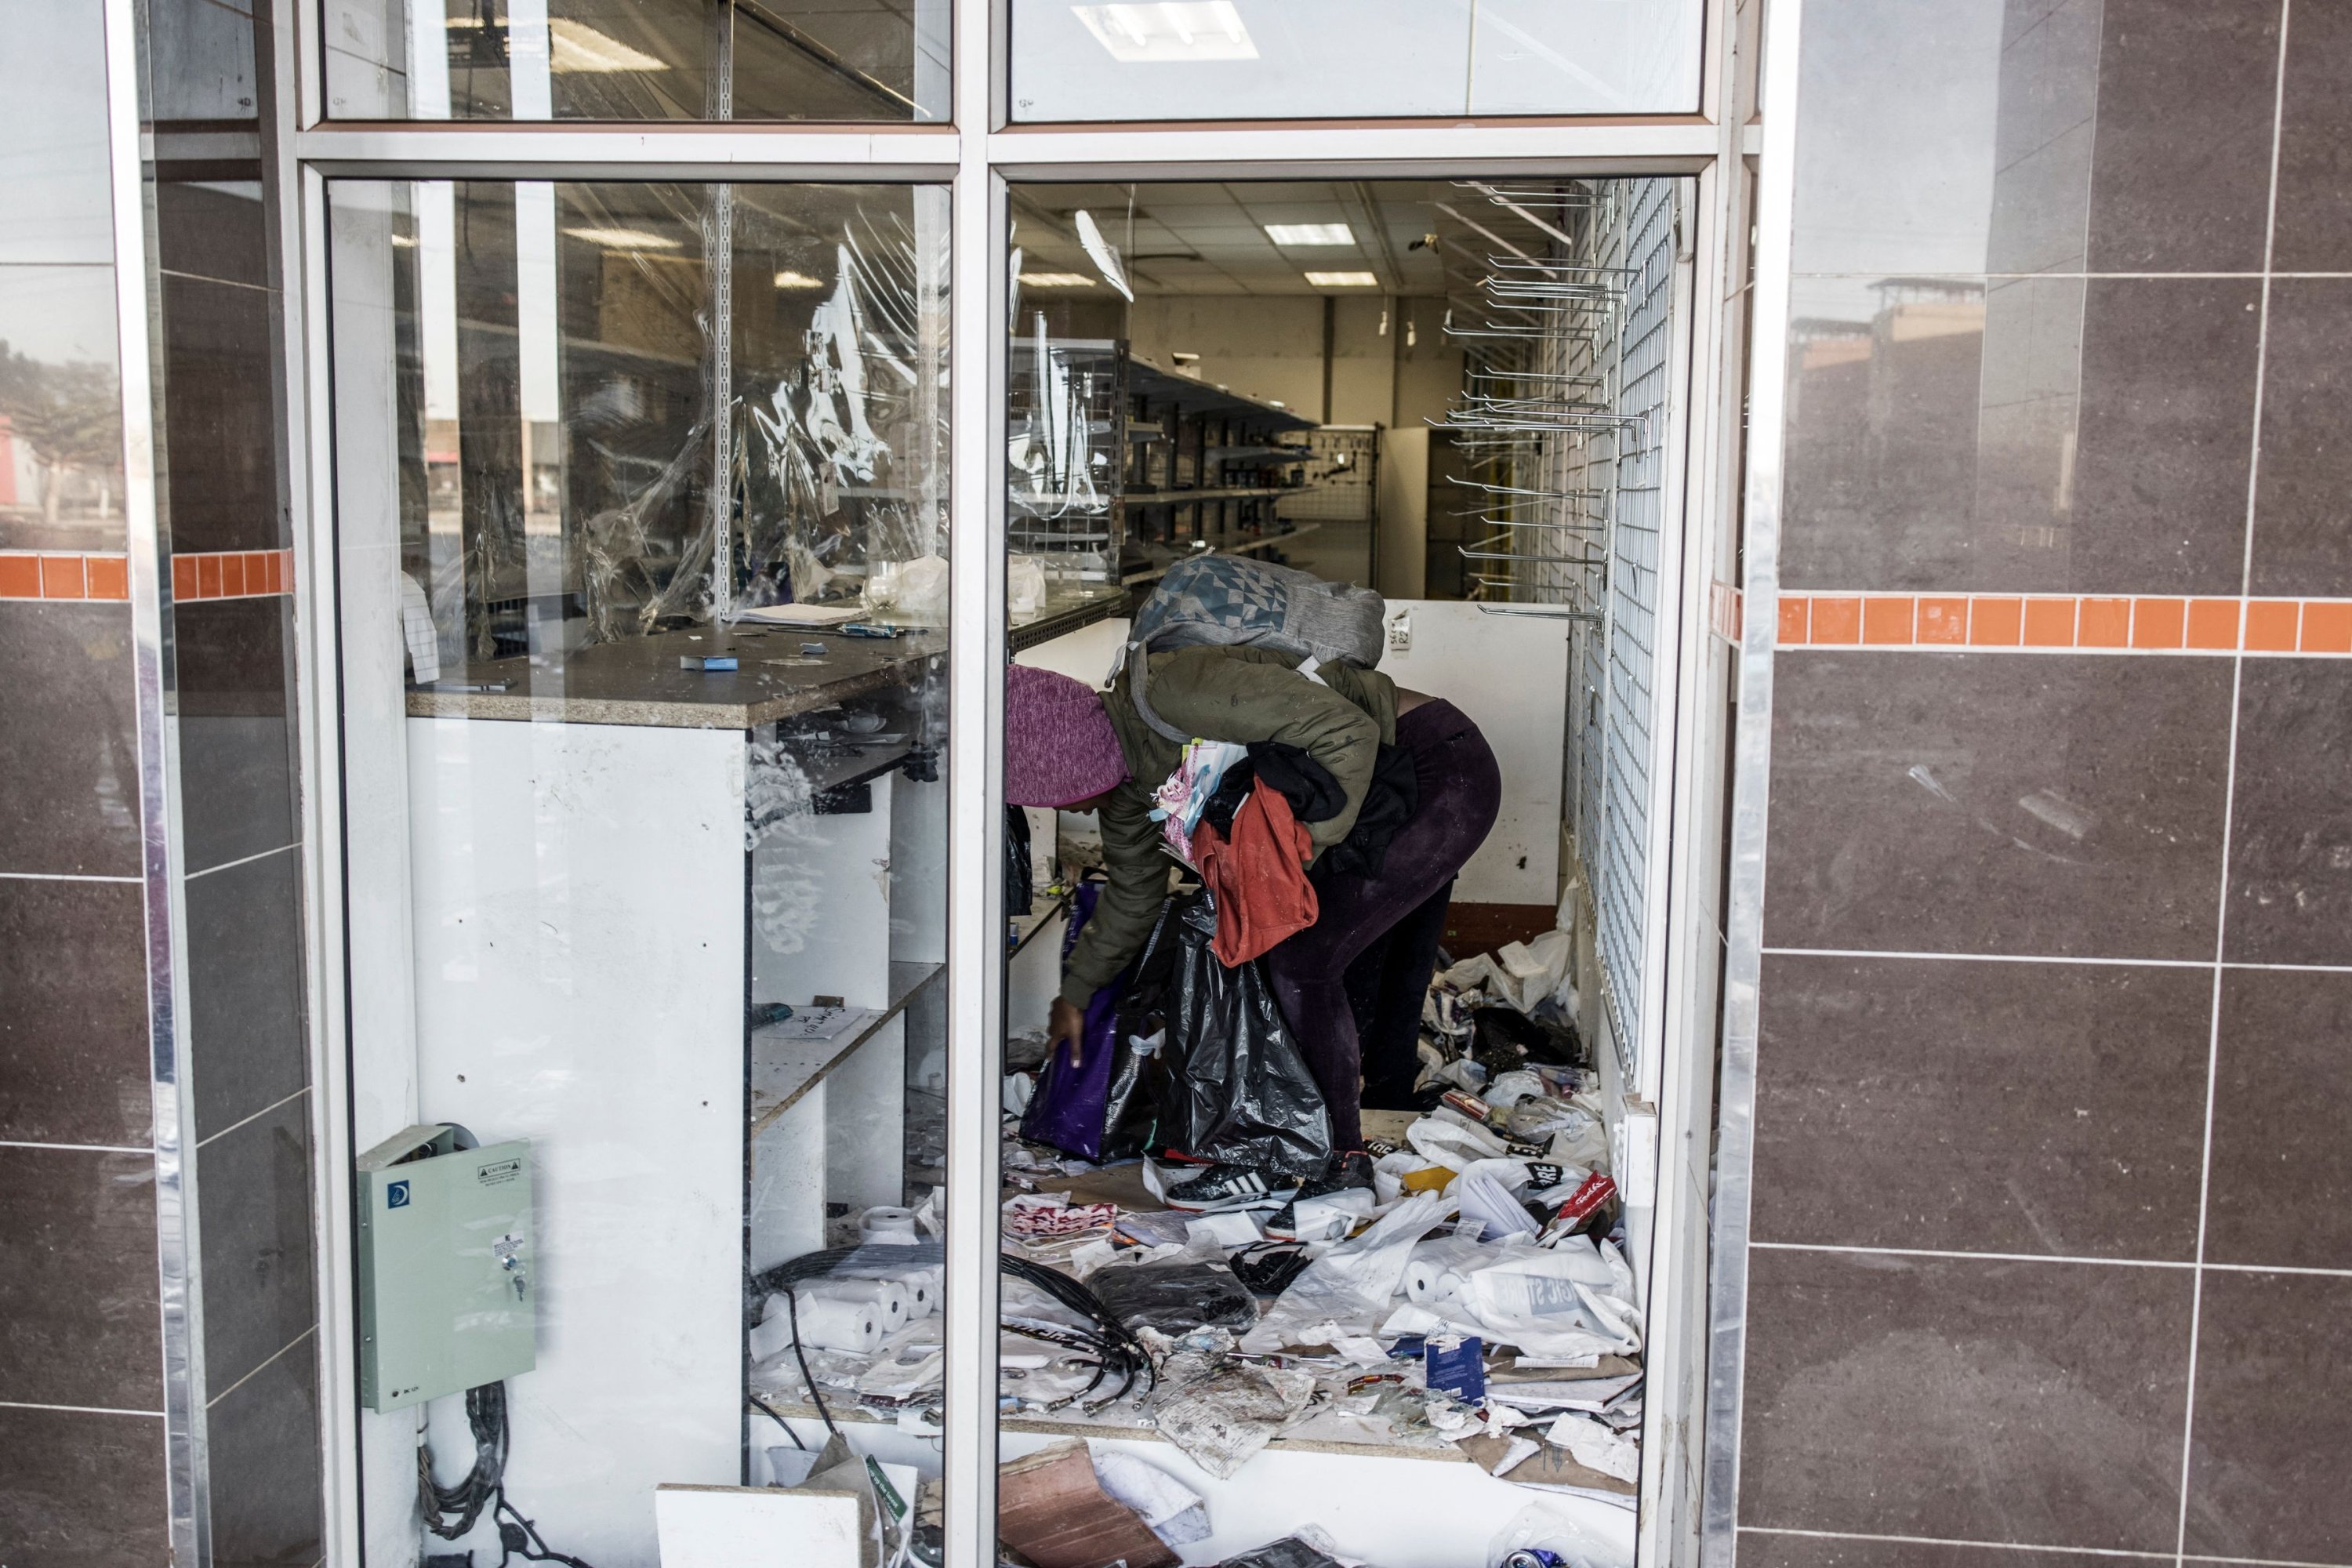 A looter takes away the few items left to grab in a vandalized mall in Vosloorus, South Africa, July 14, 2021. (AFP Photo)